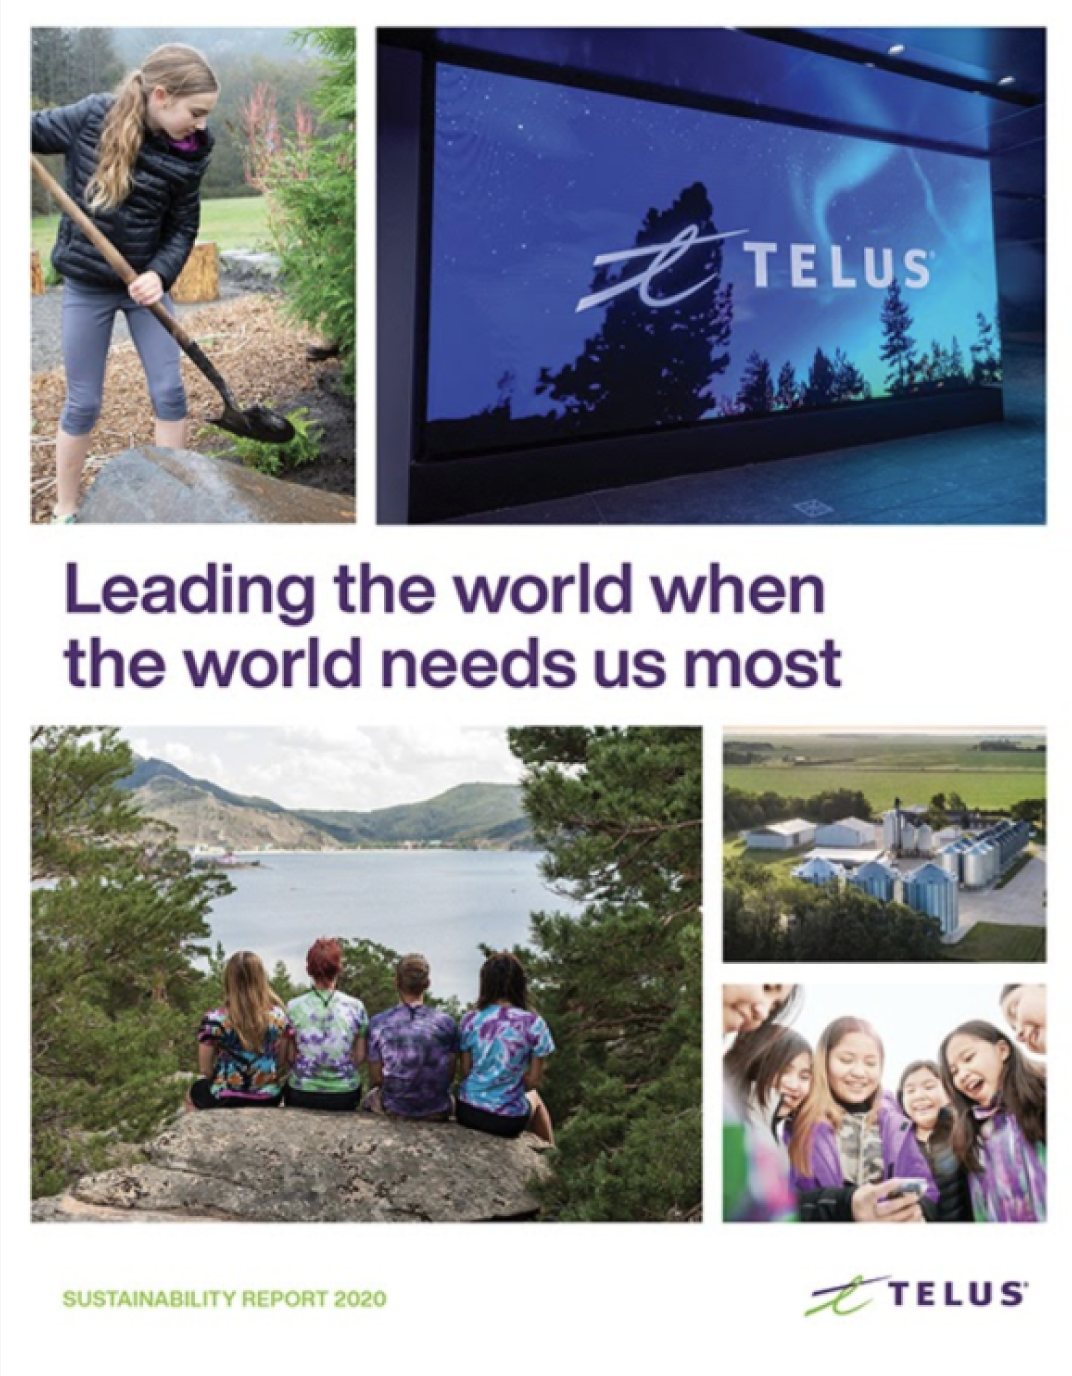 The cover of the 2020 TELUS Sustainability Report 